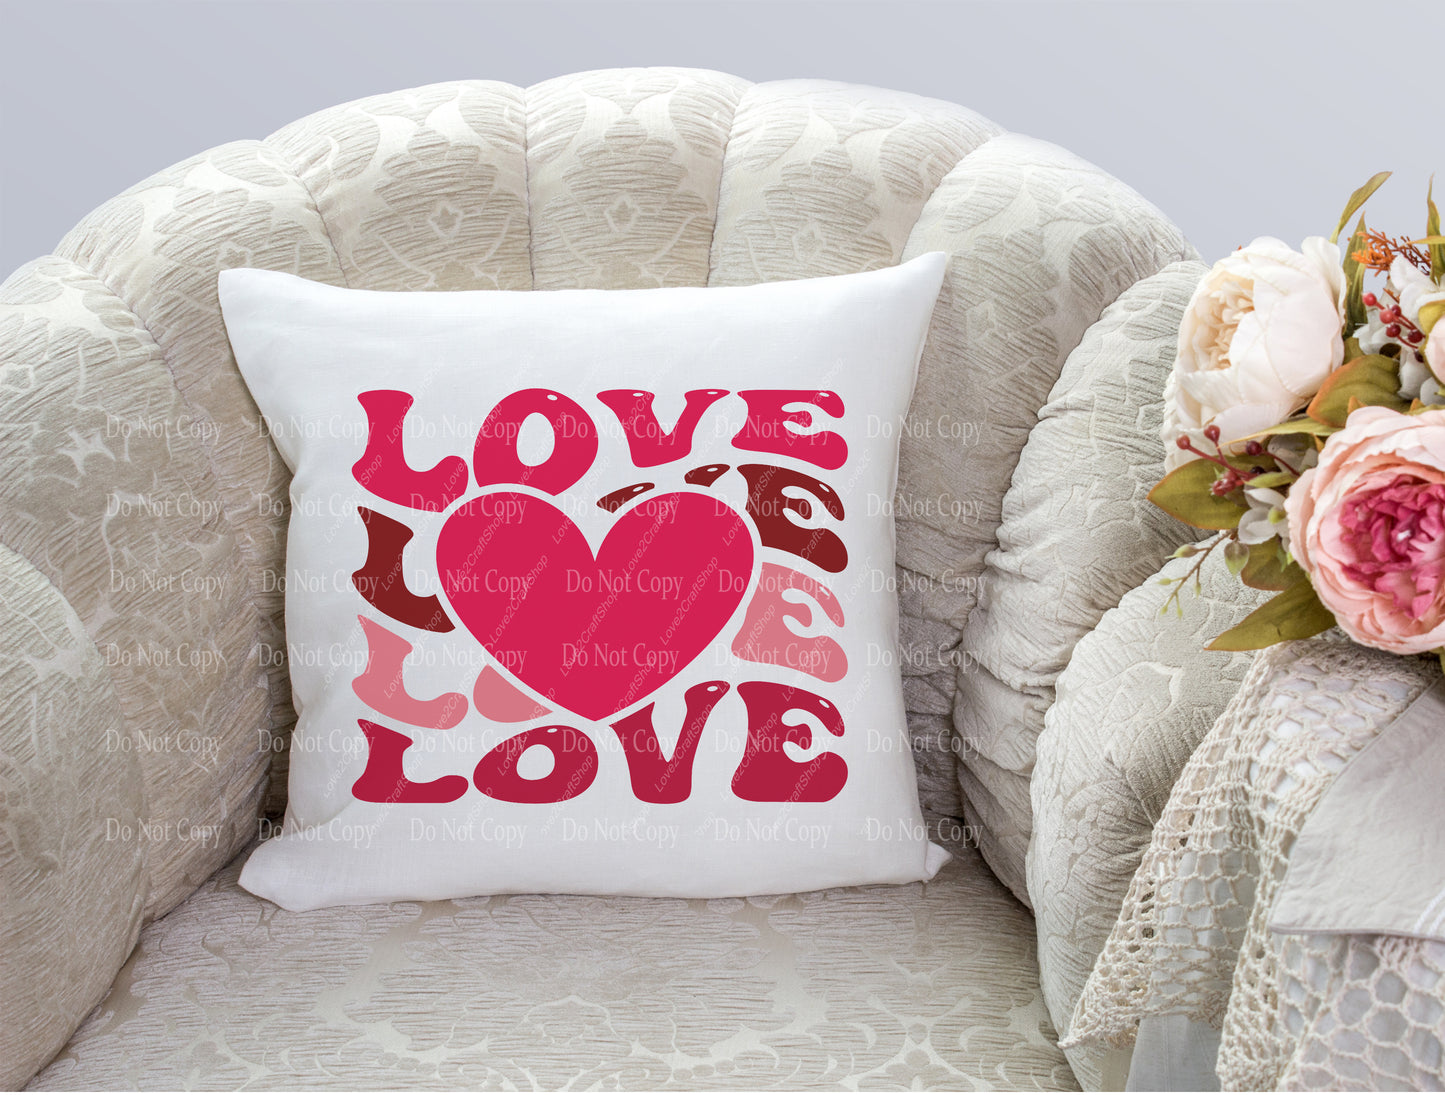 Love Stacked words with Heart pillow